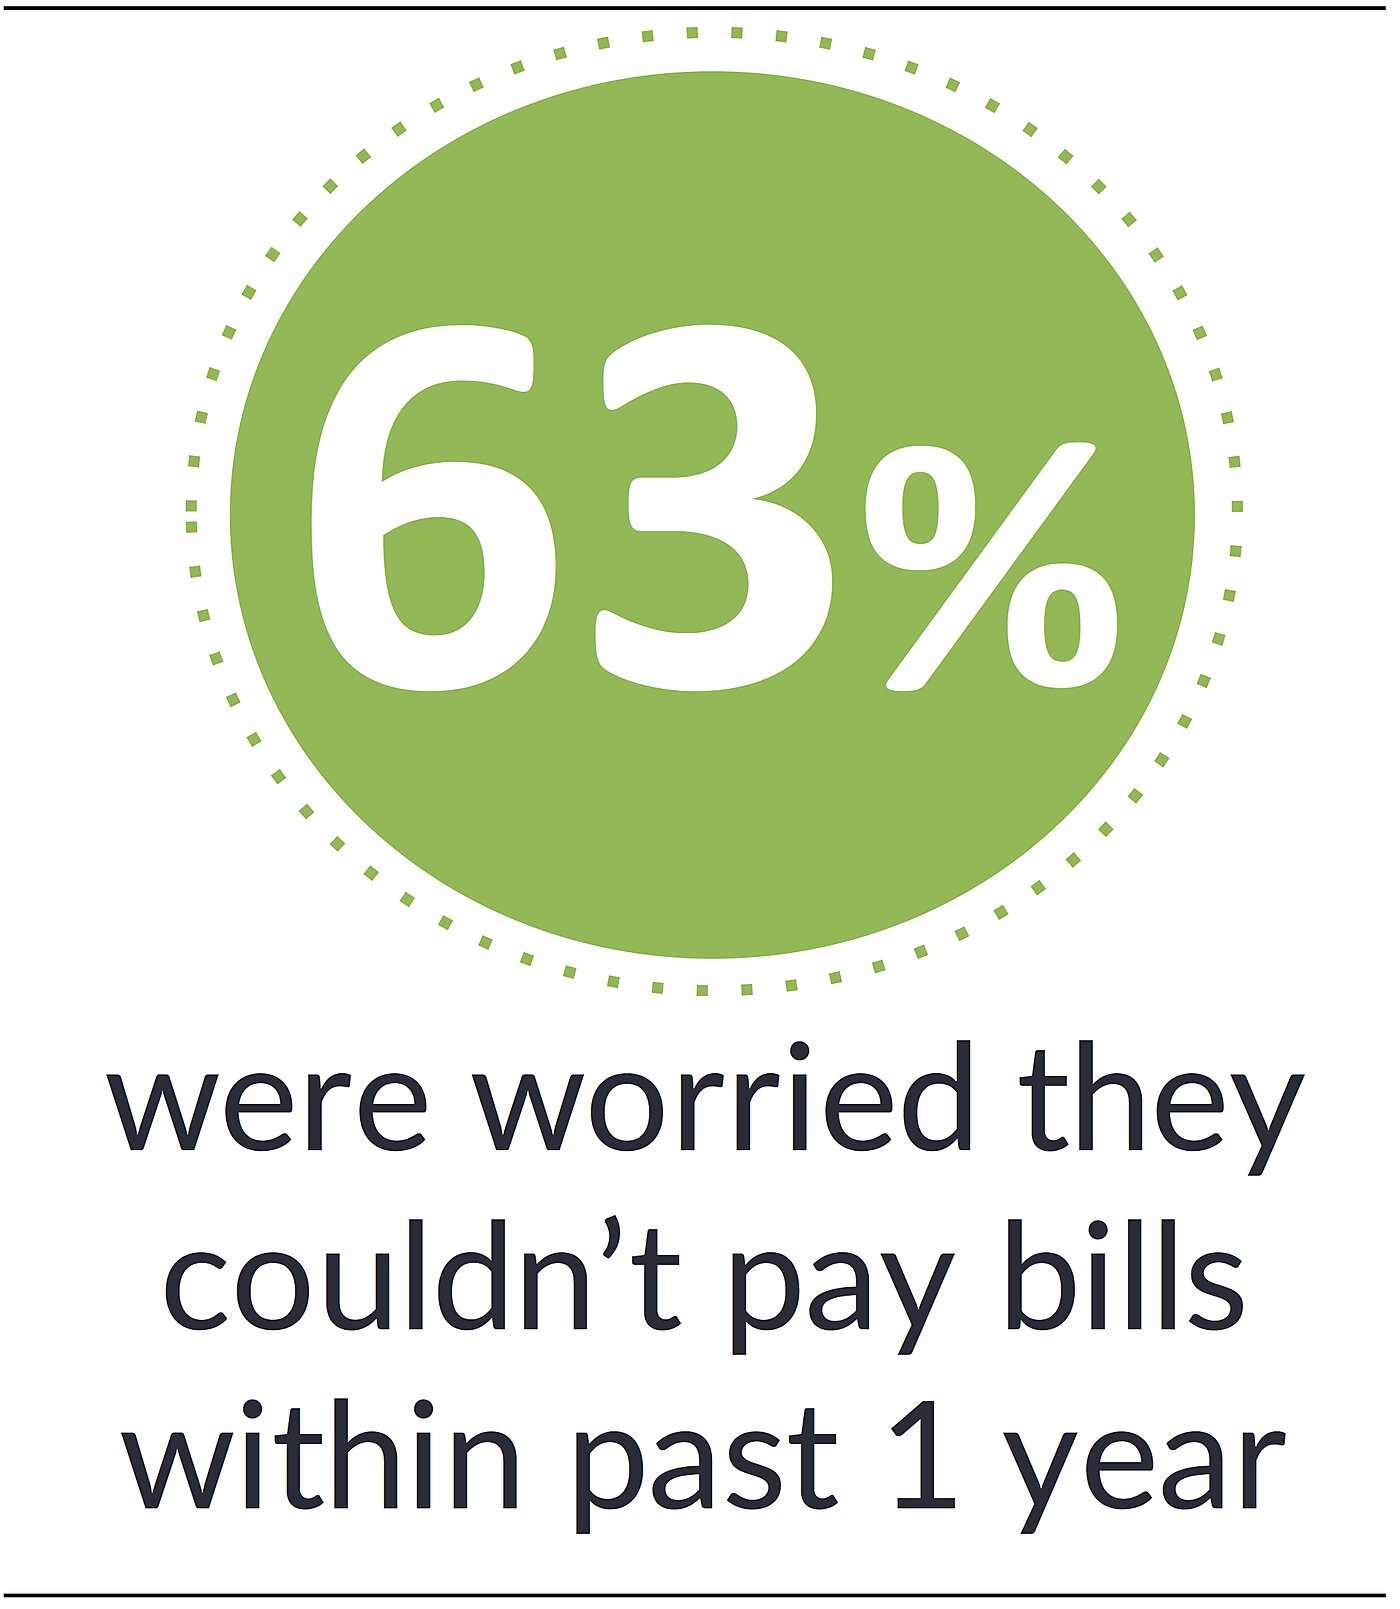 63% were worried they couldn't pay bills within past 1 year